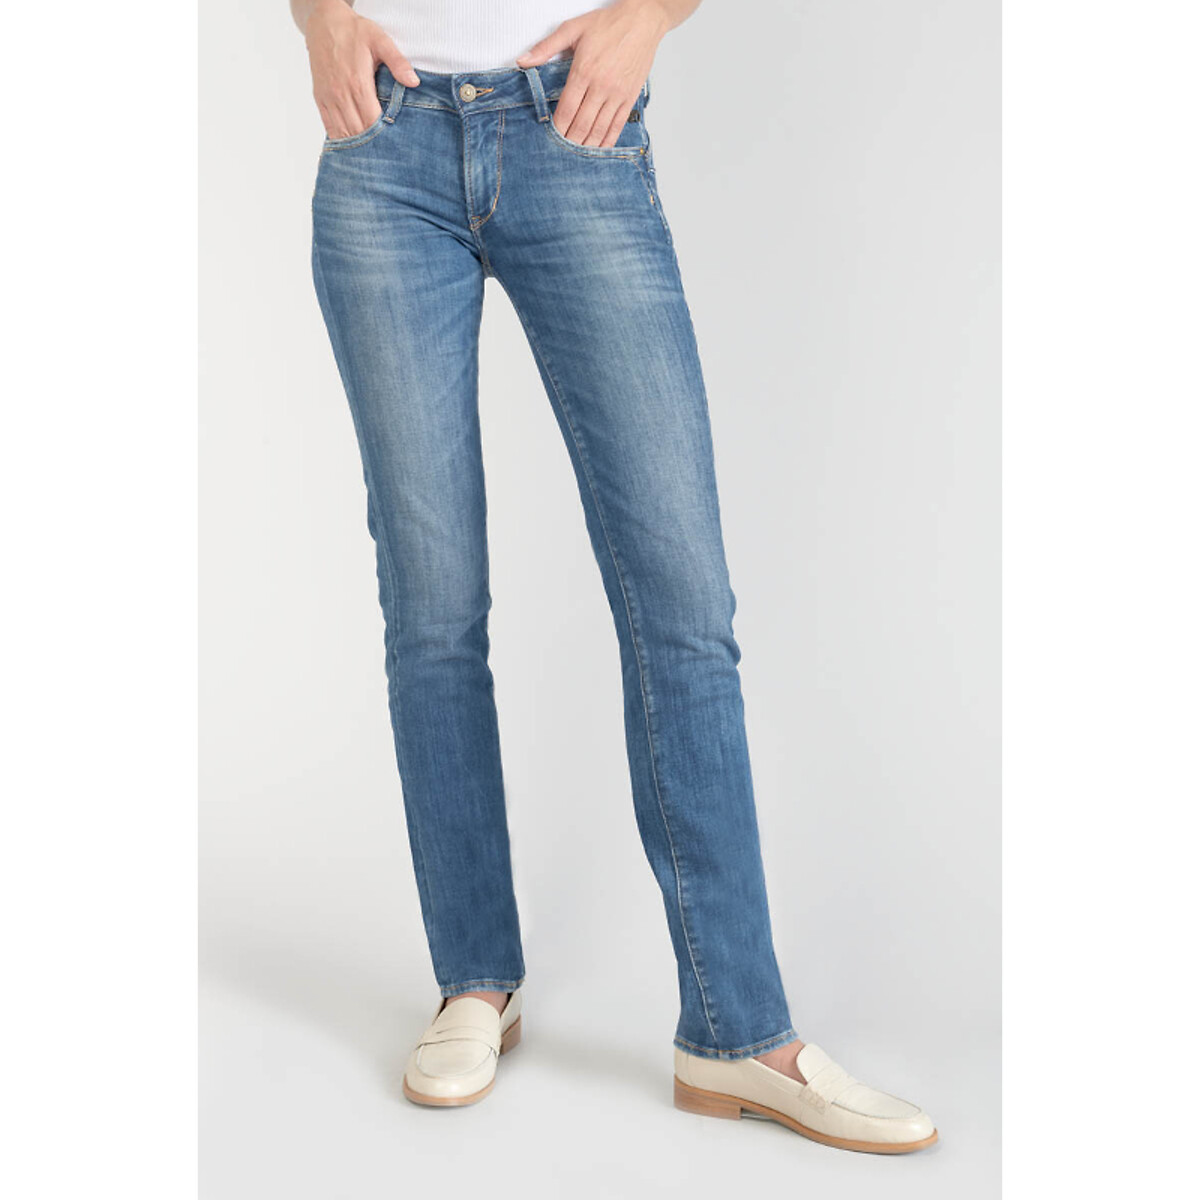 Kops Straight Jeans in Mid Rise